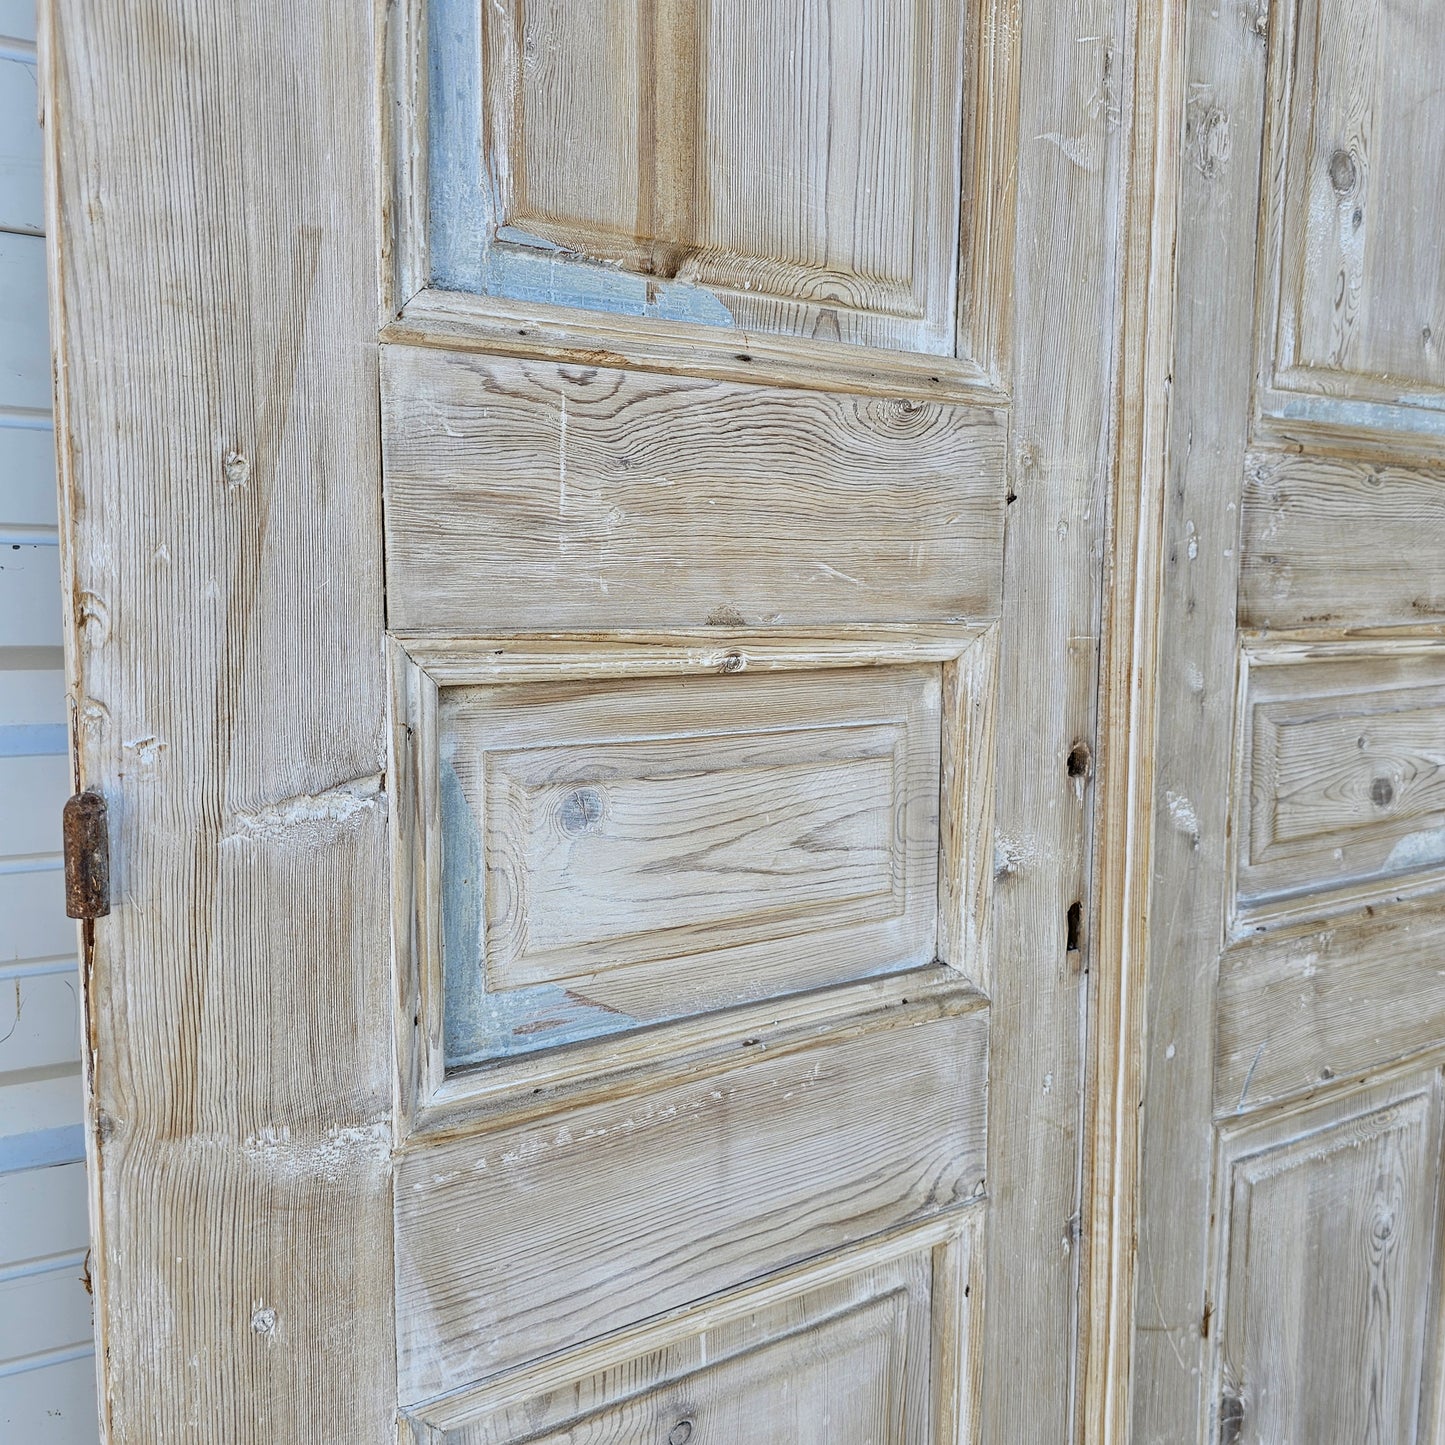 Pair of Washed Wood Panel Doors